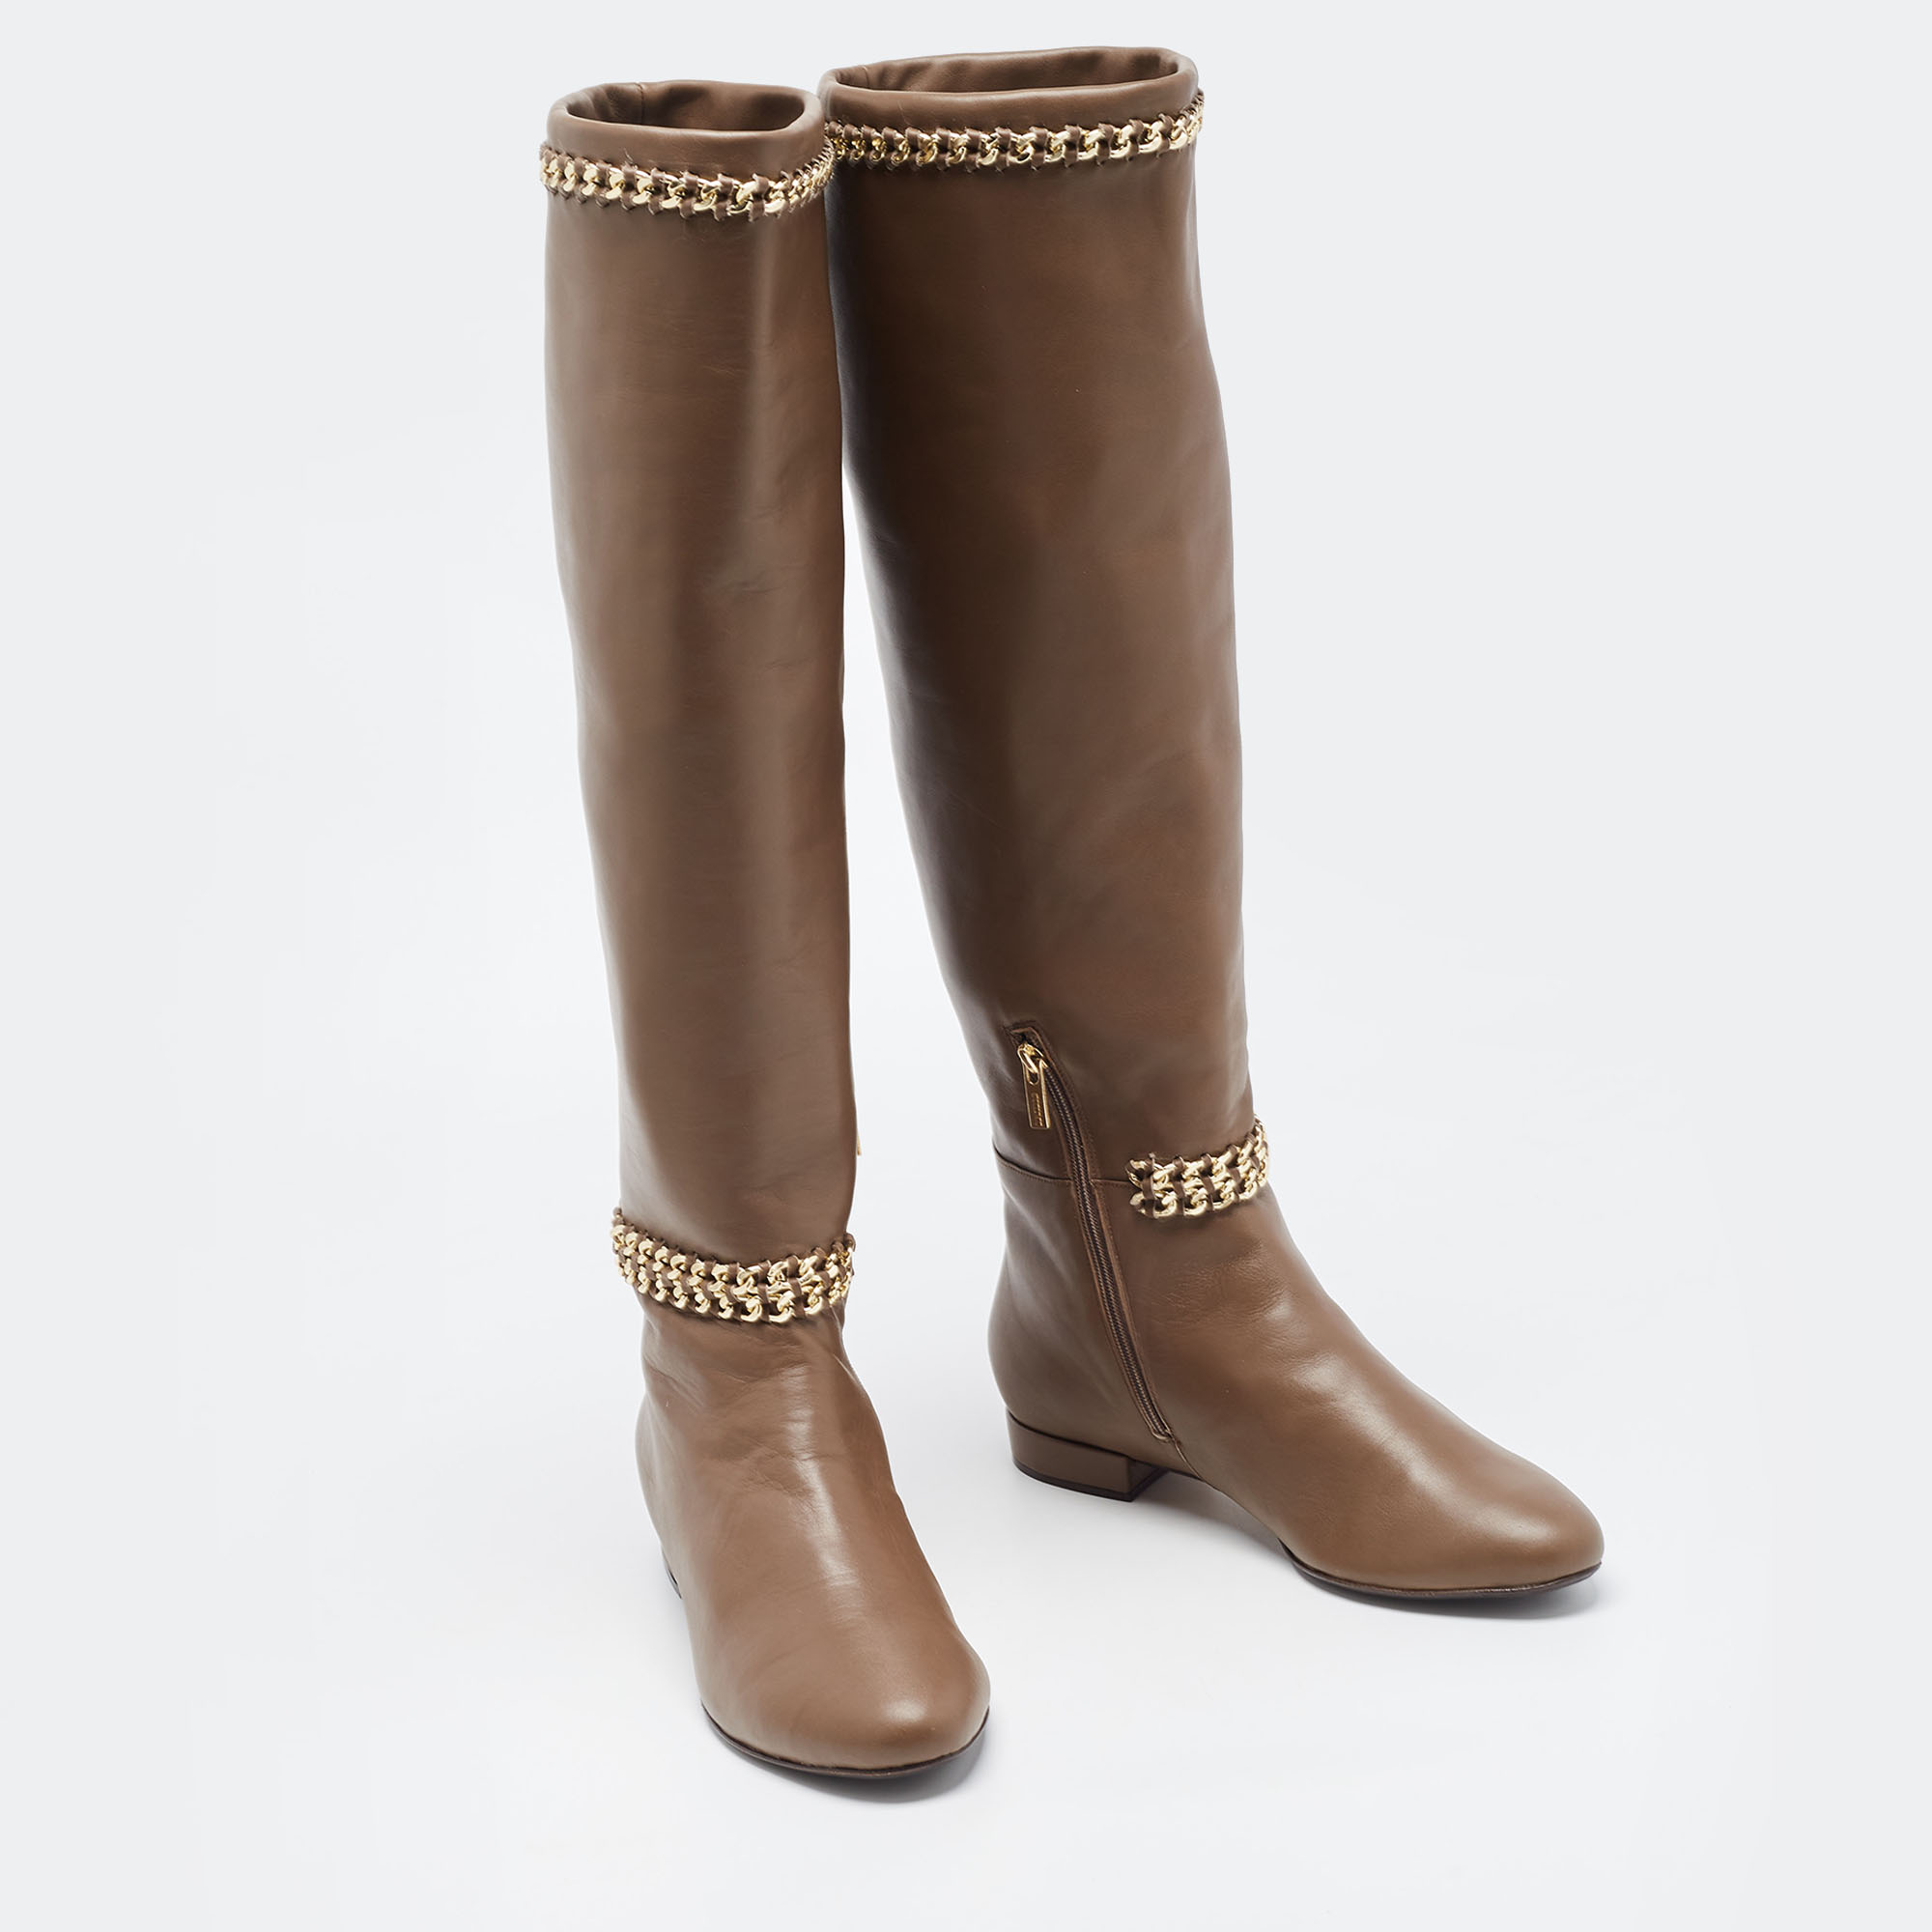 Le Silla Brown Leather Chain Detail Knee Length Boots Size 37.5